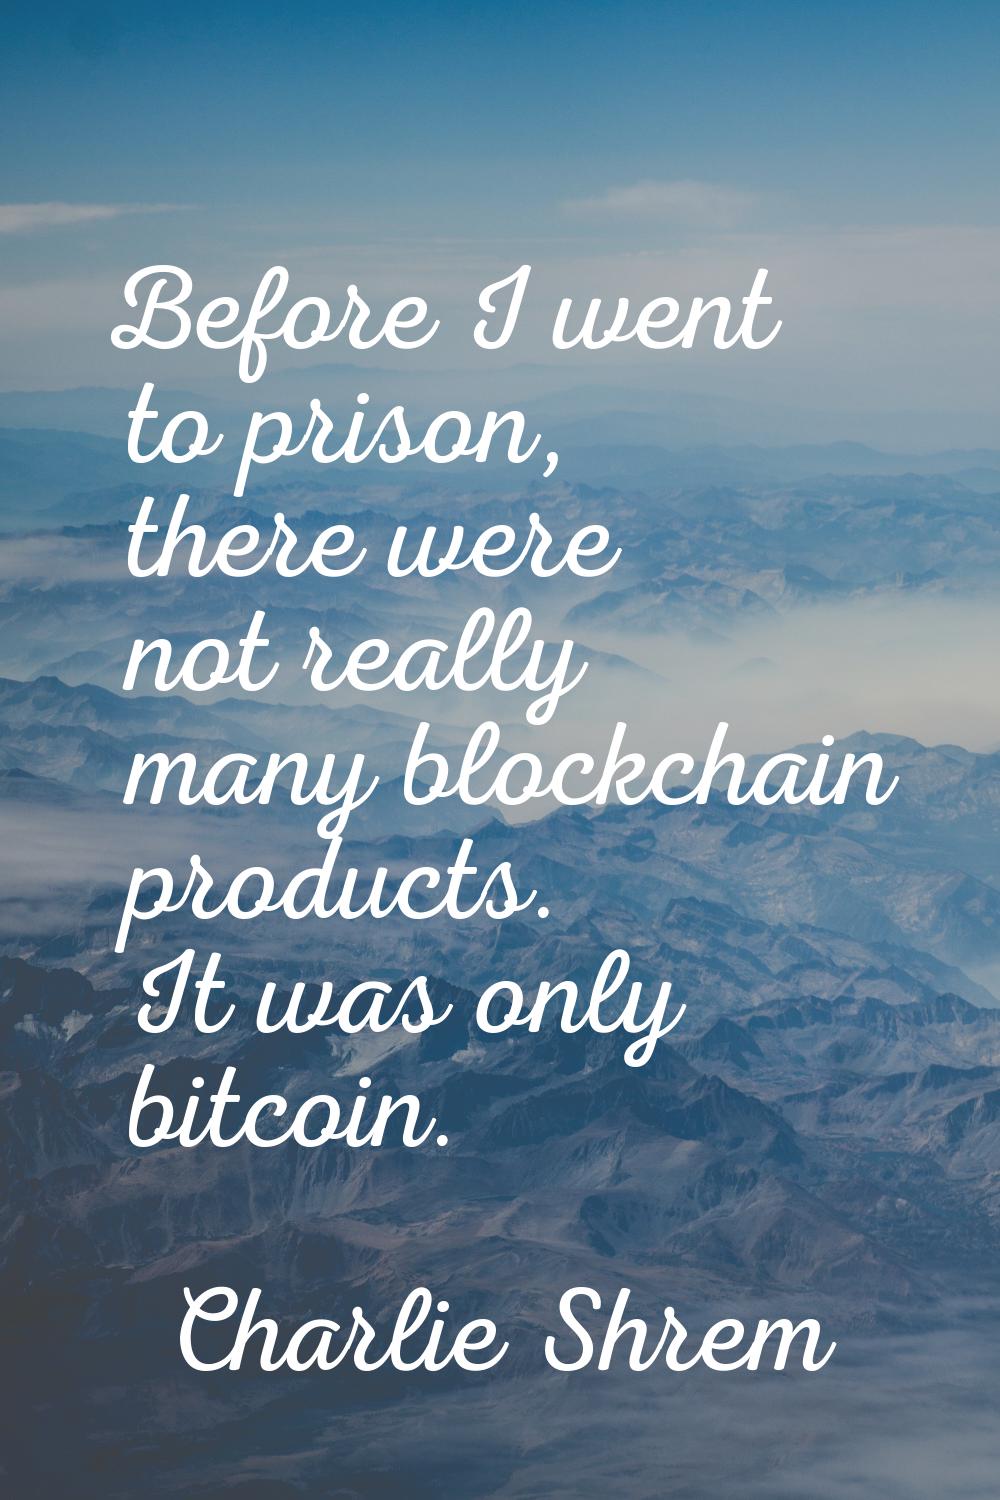 Before I went to prison, there were not really many blockchain products. It was only bitcoin.